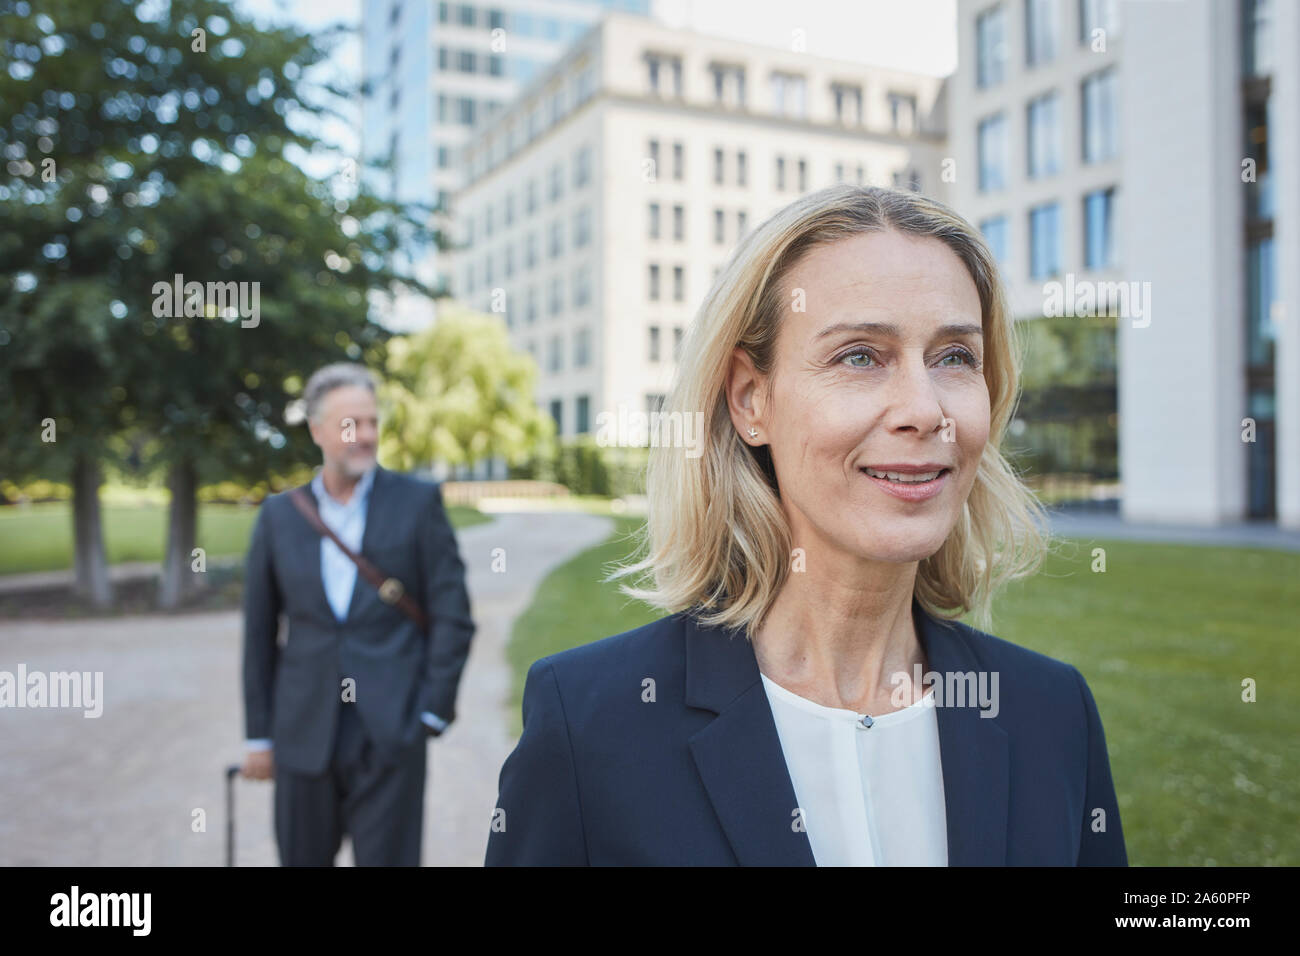 Porrait of smiling blond businesswoman in the city with businessman in background Stock Photo